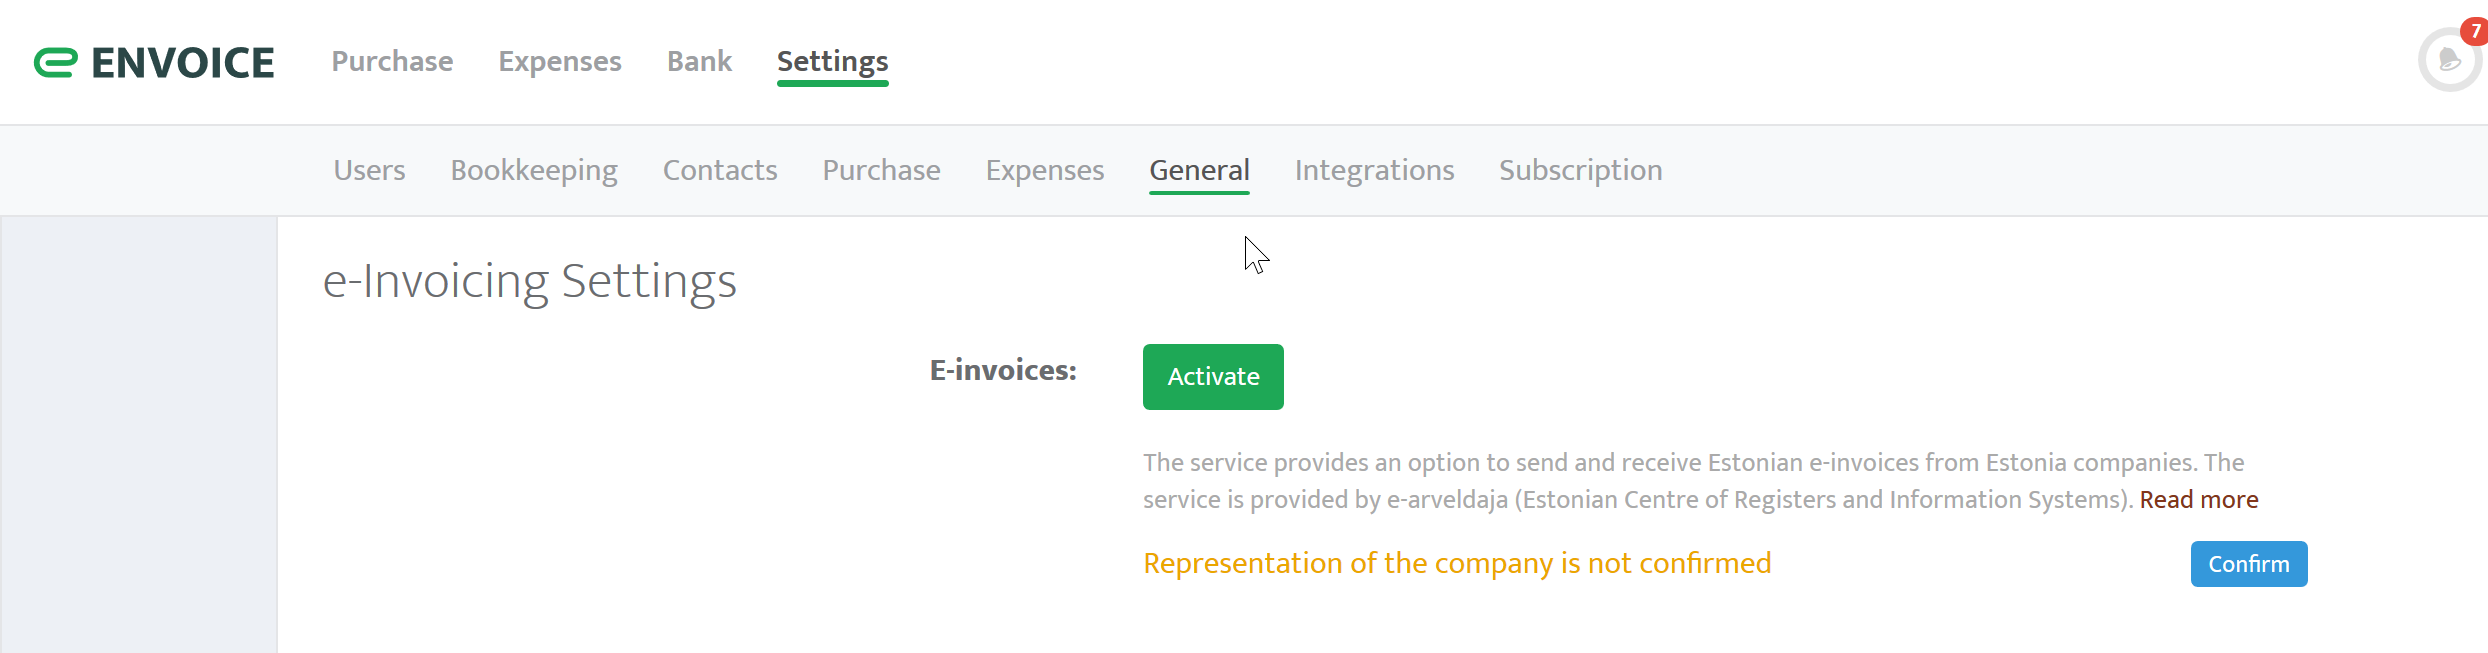 einvoicing_activation.png